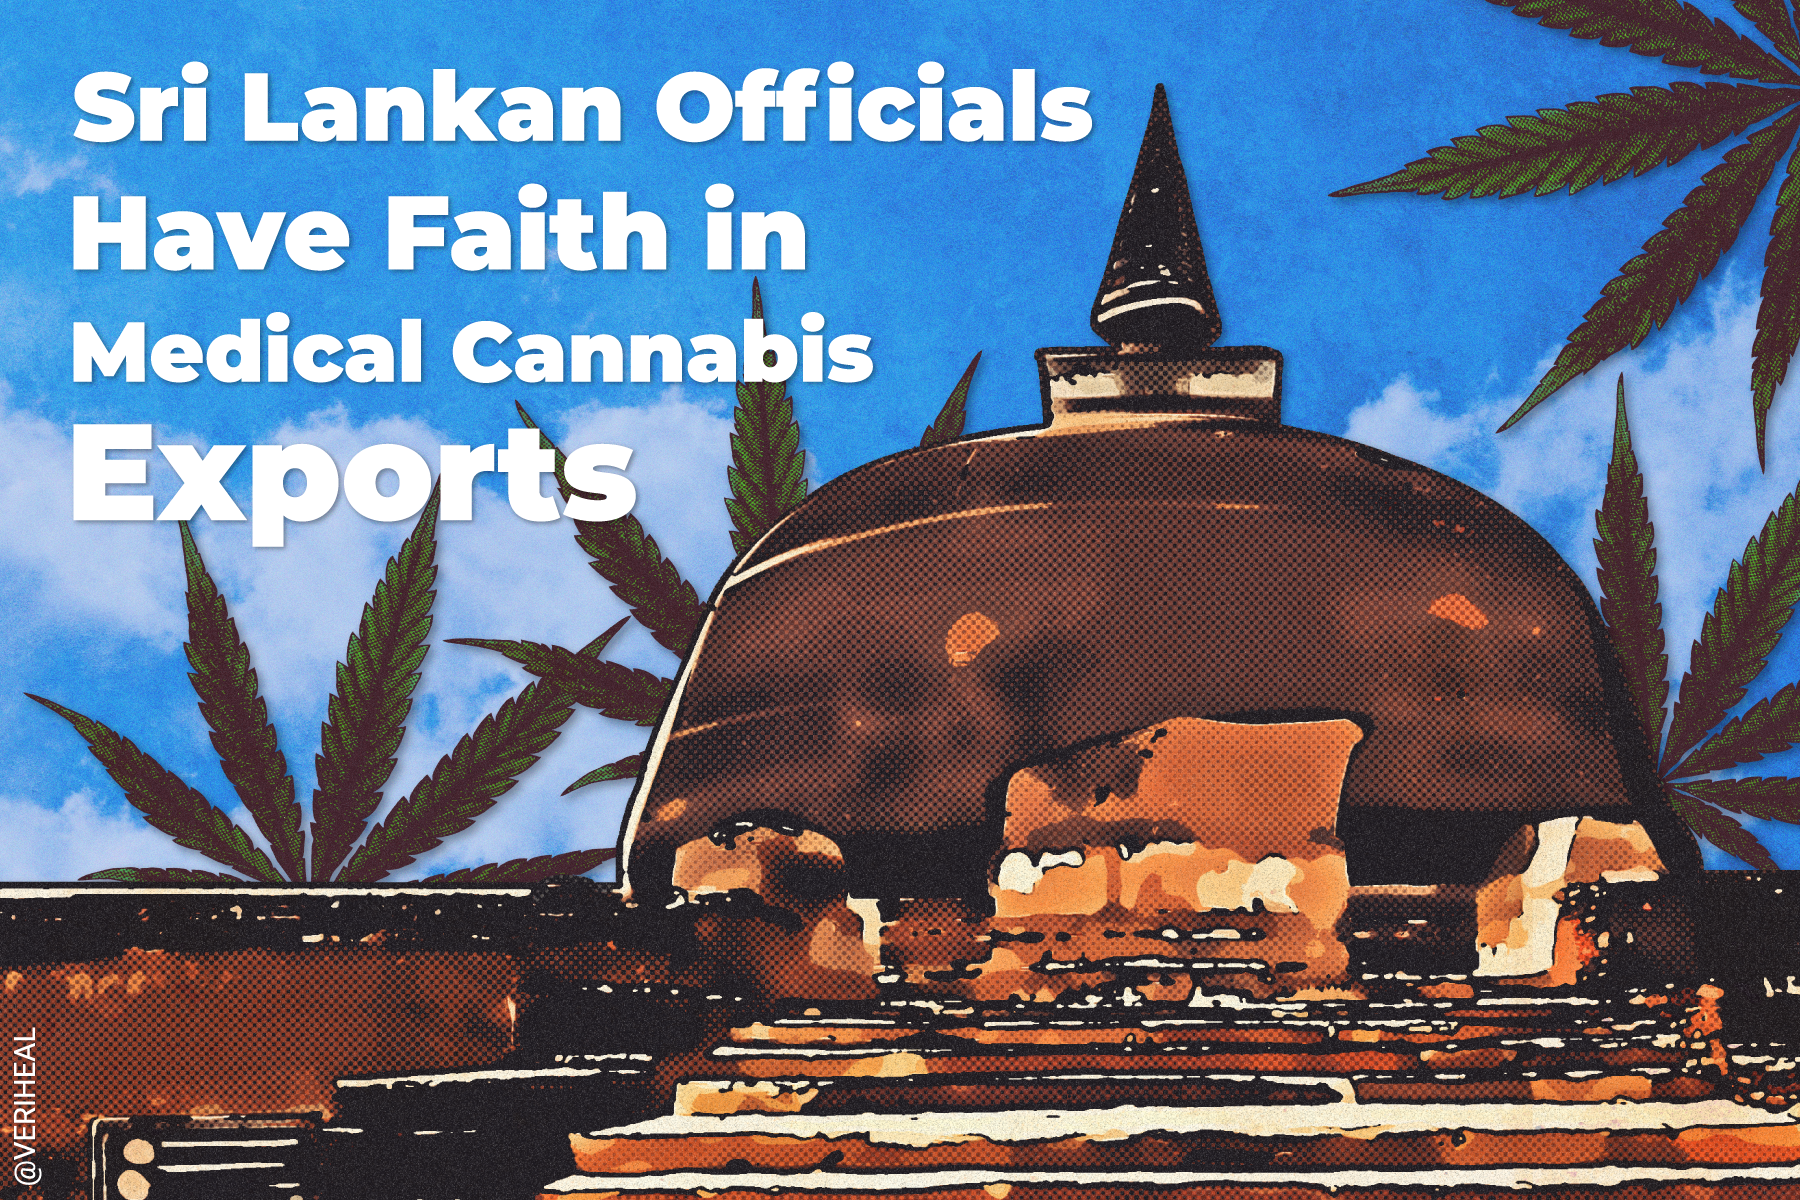 Sri Lankan Officials Have Faith in the Economic Power of Medical Cannabis Exports